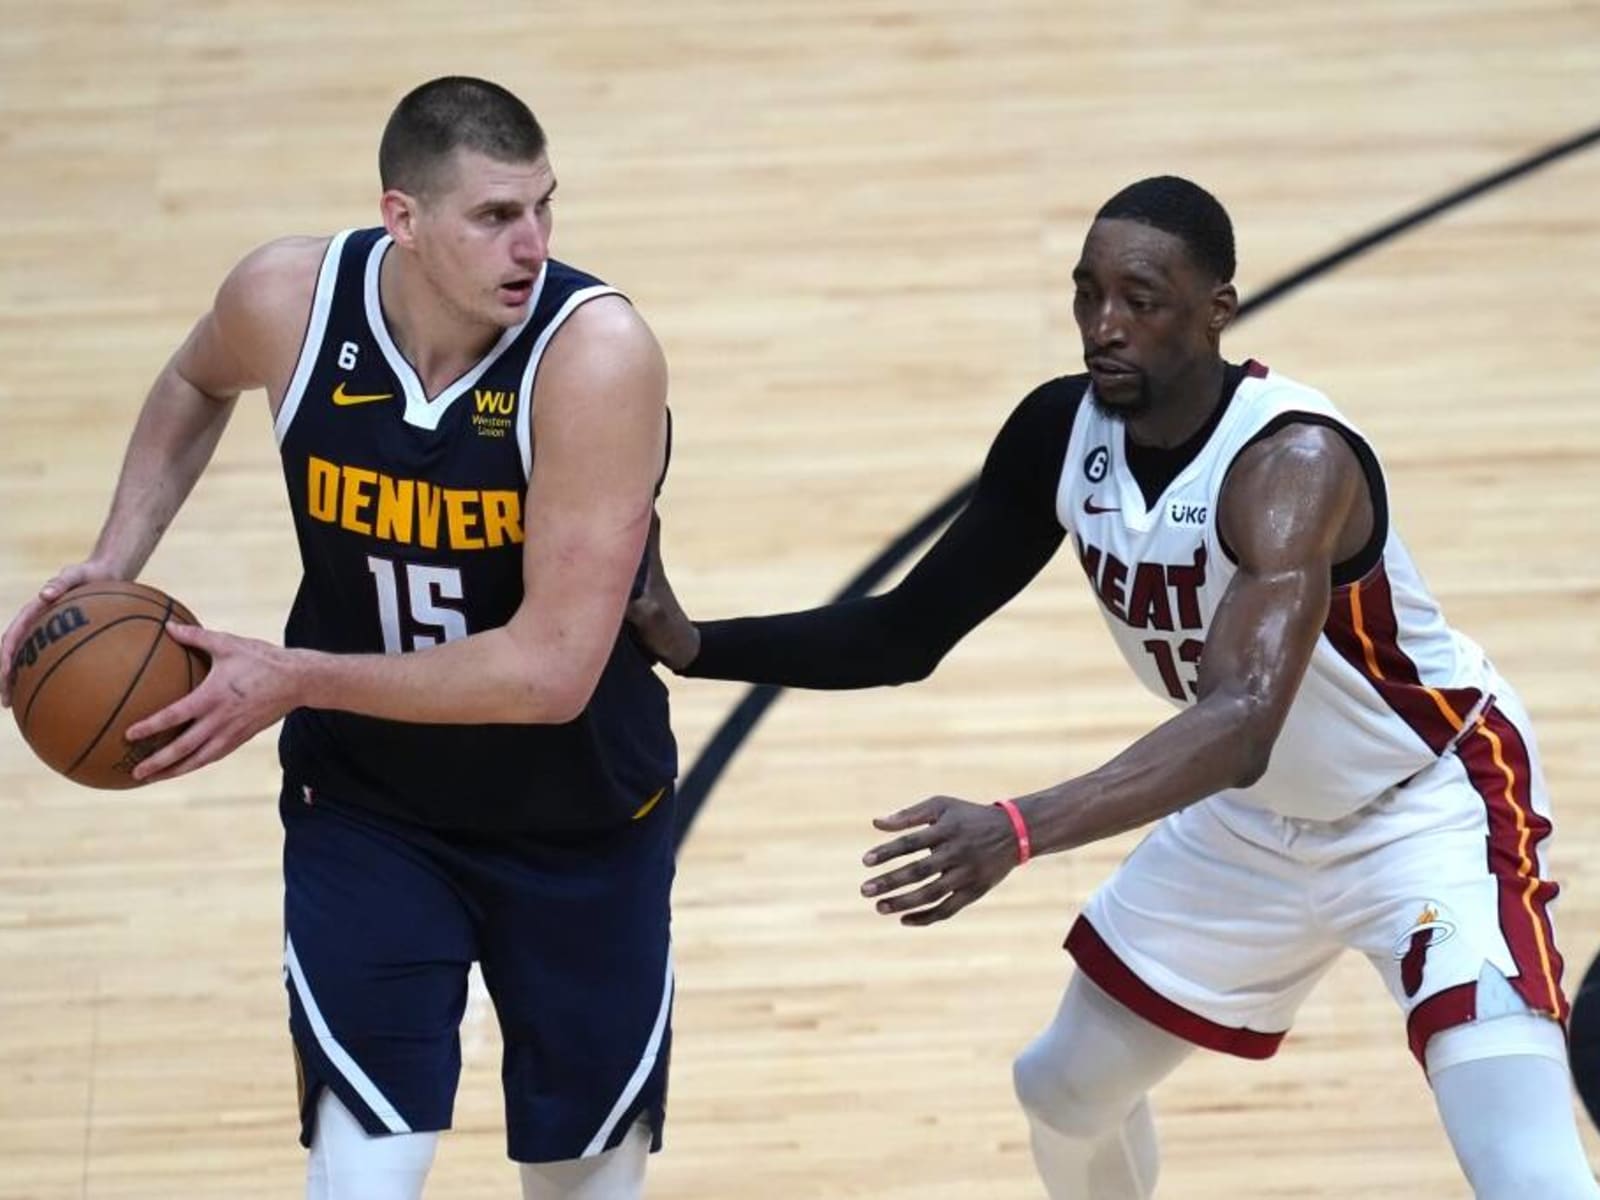 Heat vs Nuggets live stream: How to watch NBA Finals game 2 online